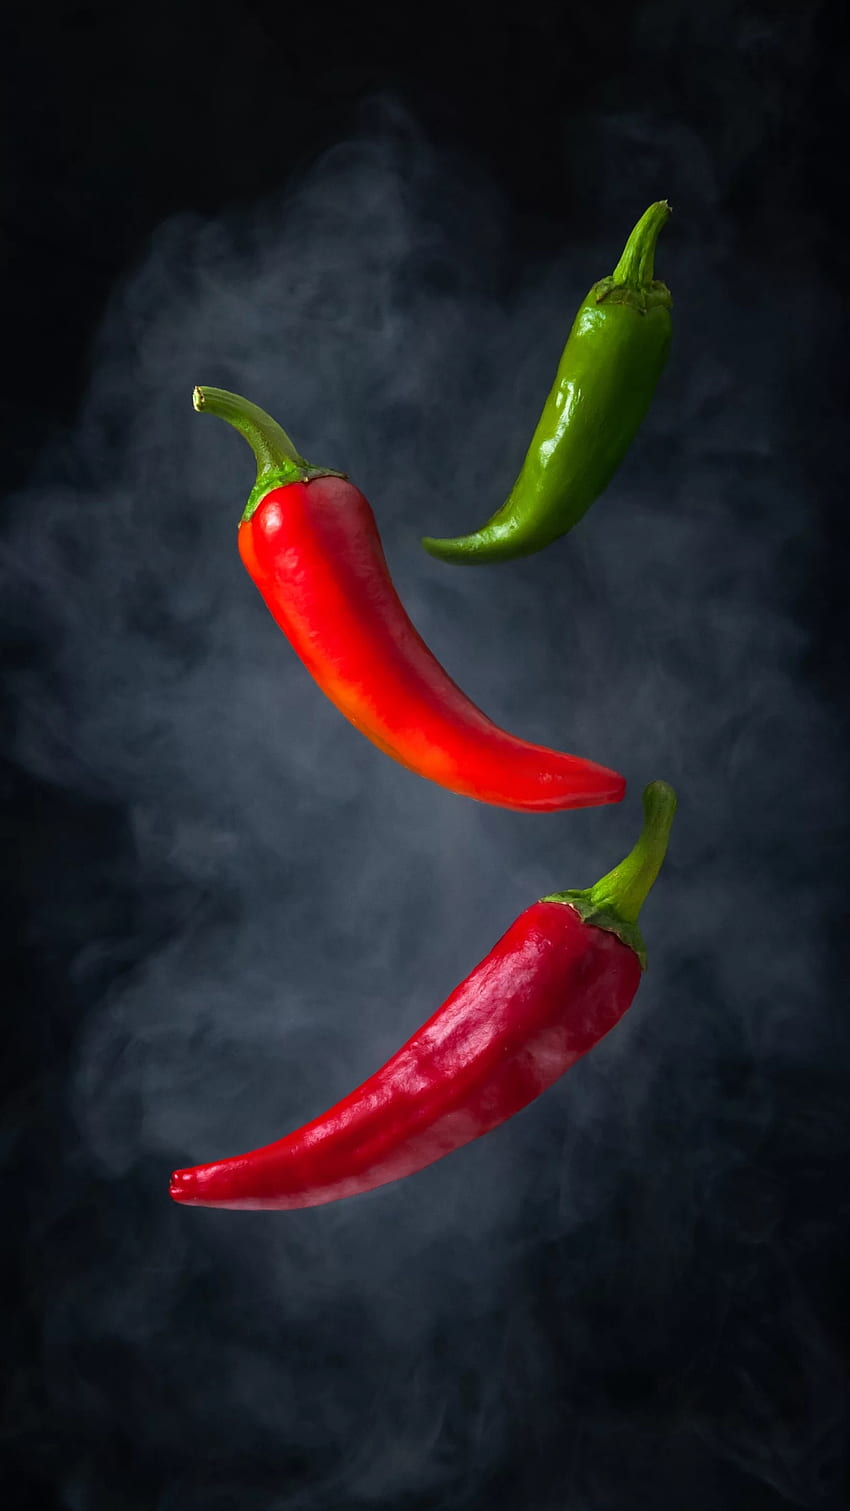 Hot chili pepper, falling, ingredient, red and green, chili pepper HD phone wallpaper